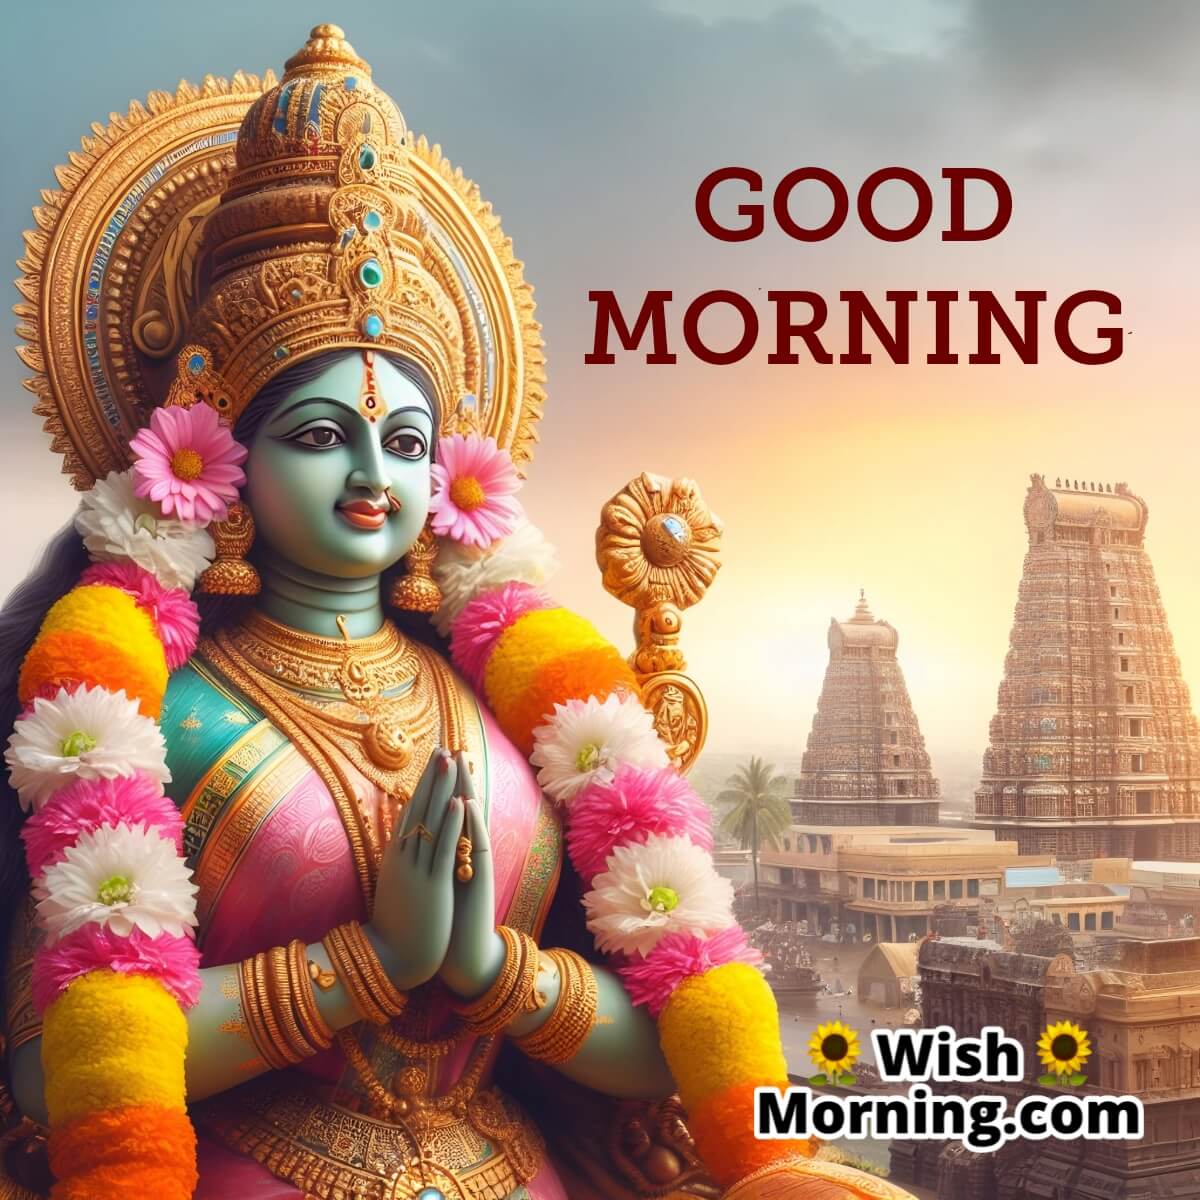 Good Morning With Blessings From Meenakshi Amman